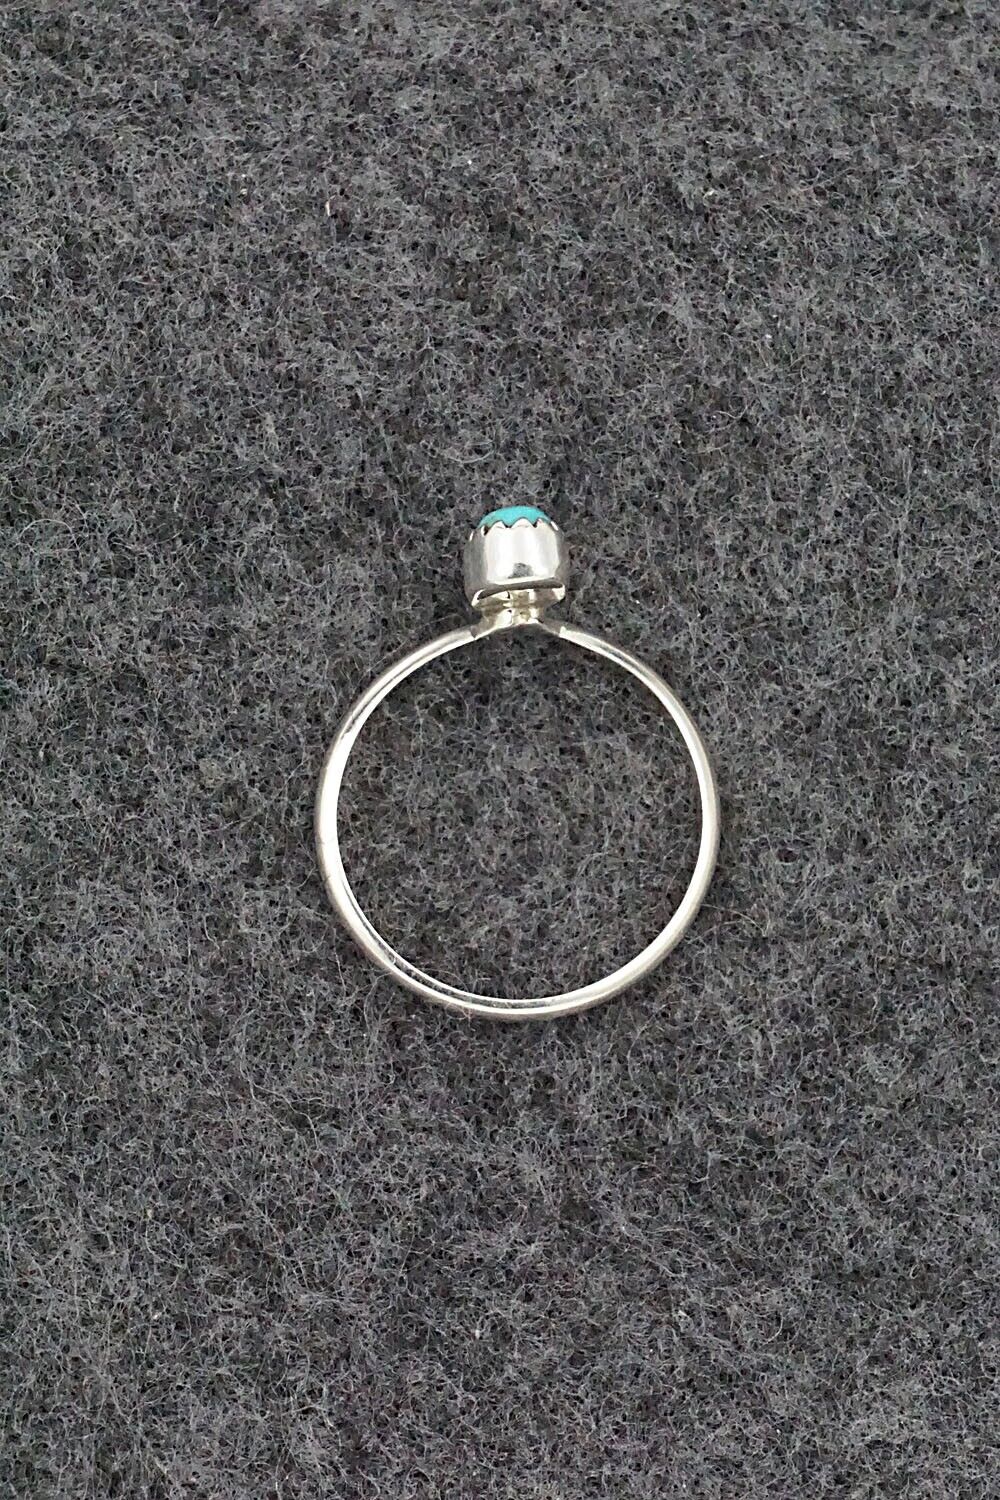 Turquoise & Sterling Silver Ring - Hiram Largo - Size 6.75